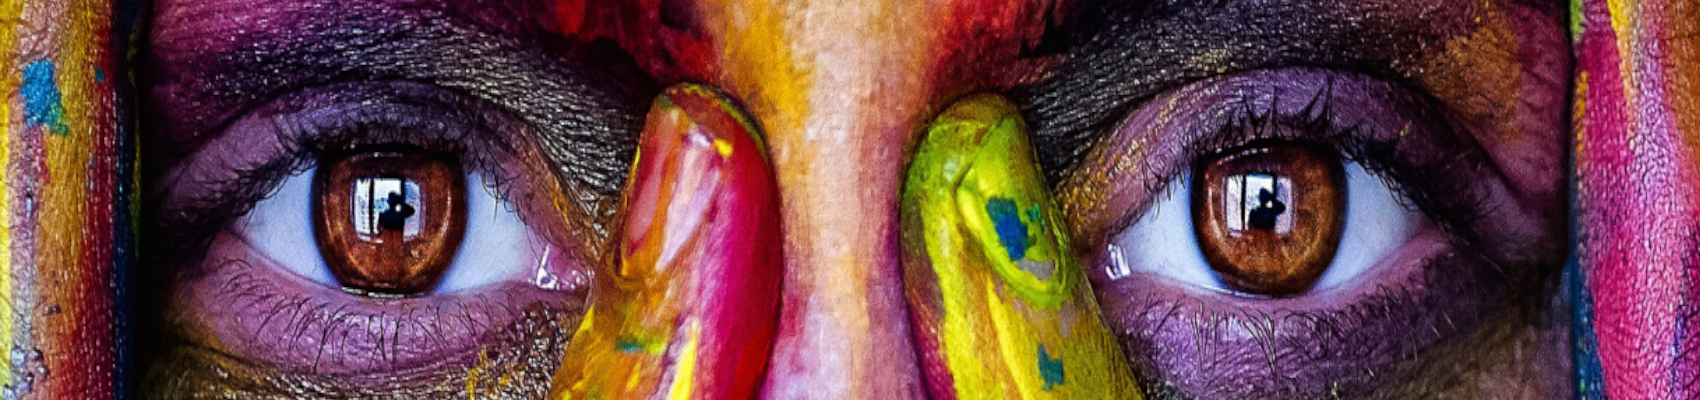 Close up of a painted face with painted hands framing the eyes.